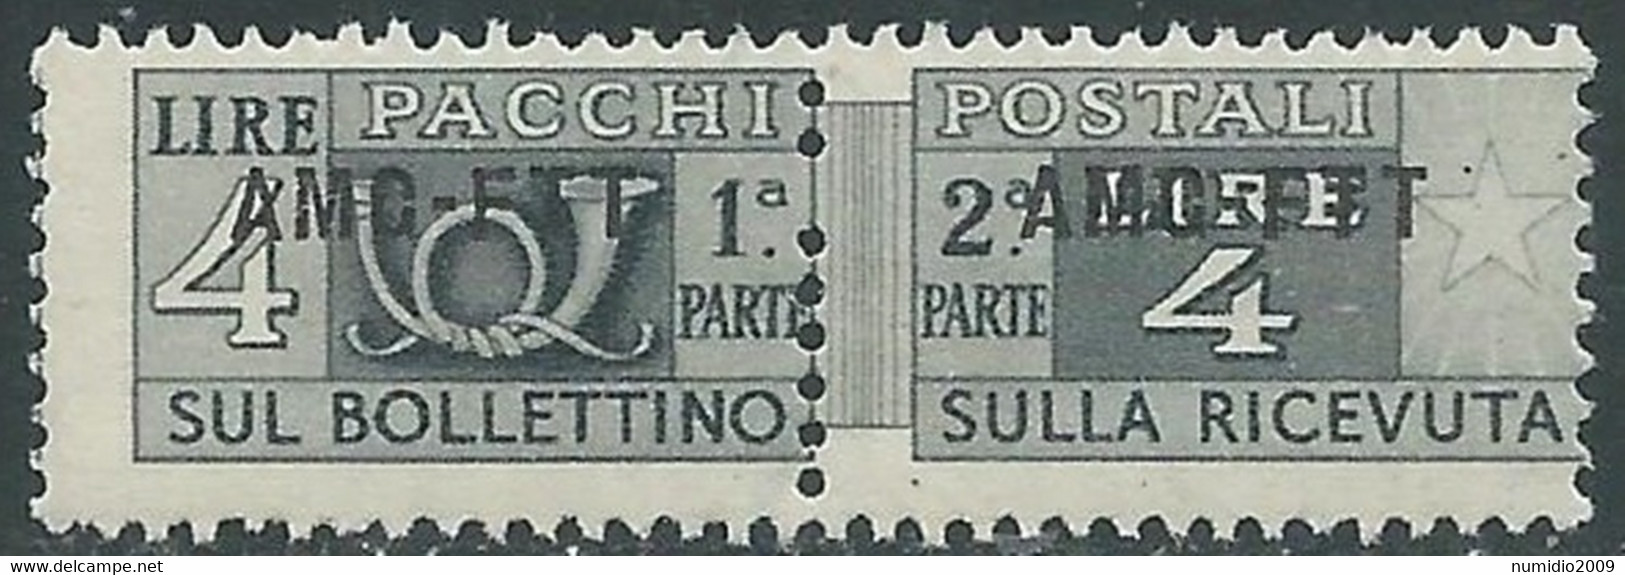 1949-53 TRIESTE A PACCHI POSTALI 4 LIRE MNH ** - RE24-8 - Postal And Consigned Parcels